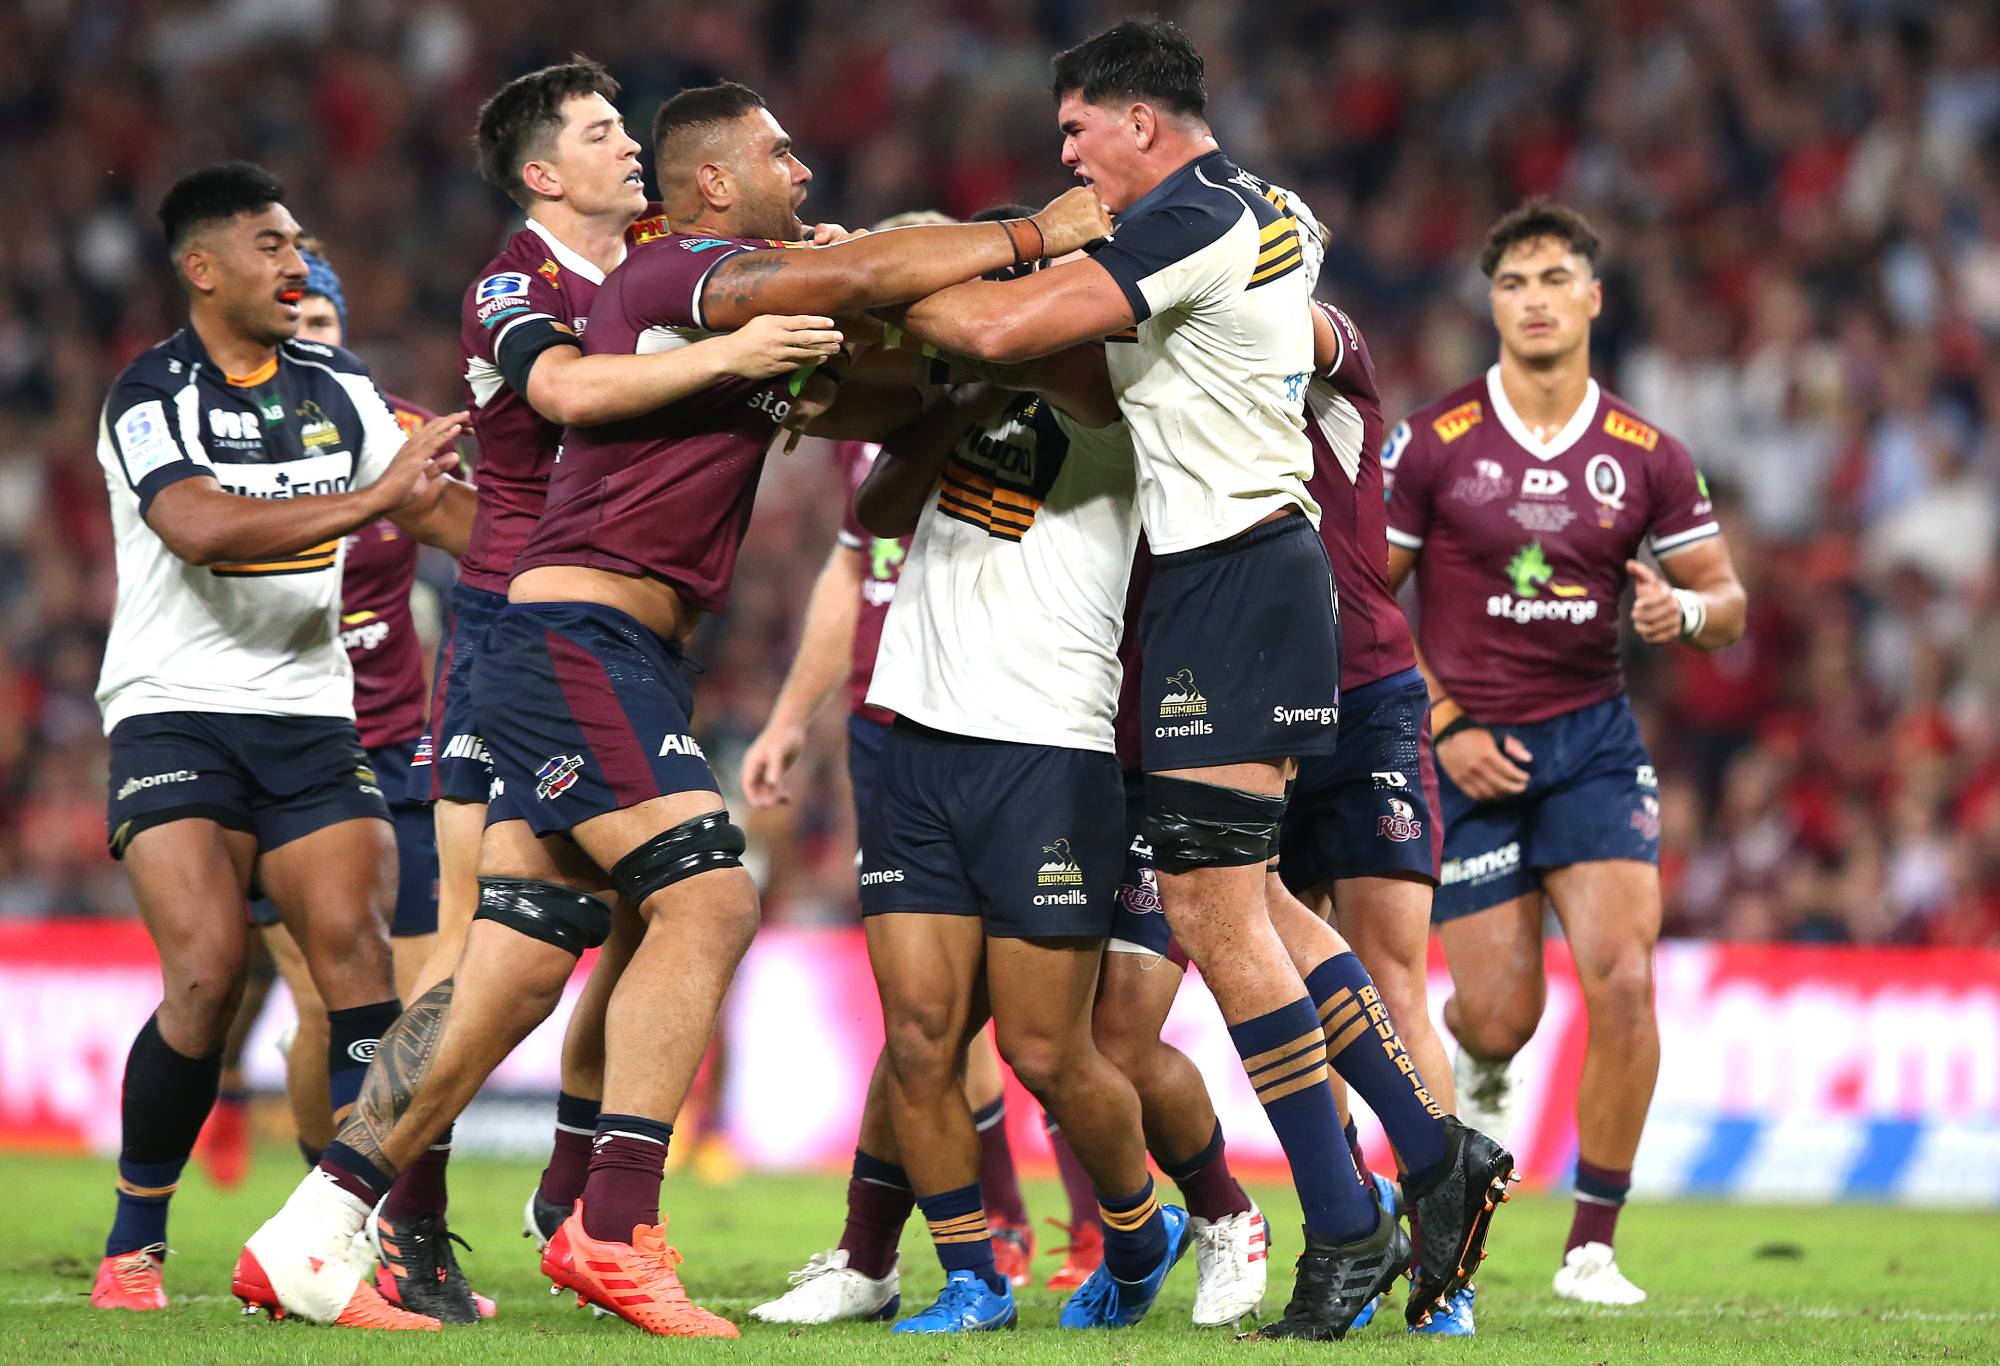 ‘Cast offs, rejects and defectors’: Why Reds vs. Brumbies is rugby’s gripping grudge match